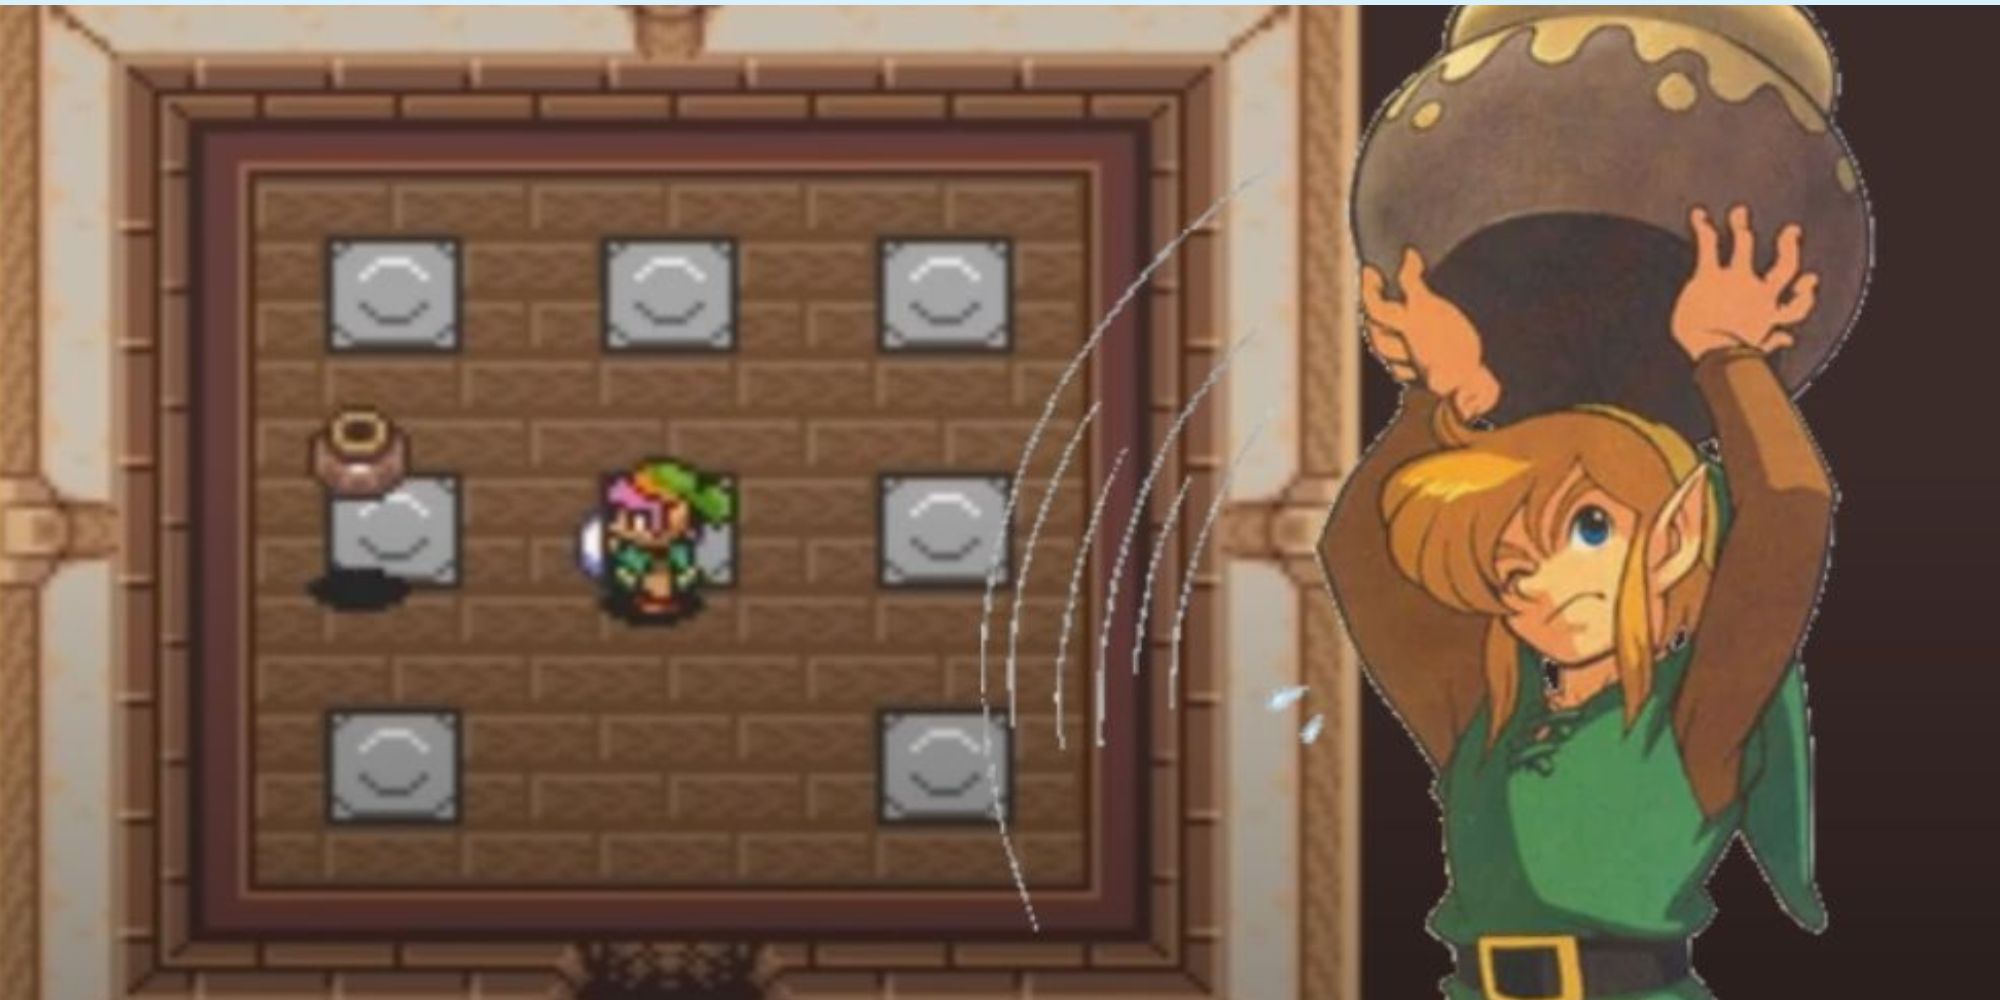 The Legend of Zelda: A Link to the Past Decompilation project emerges